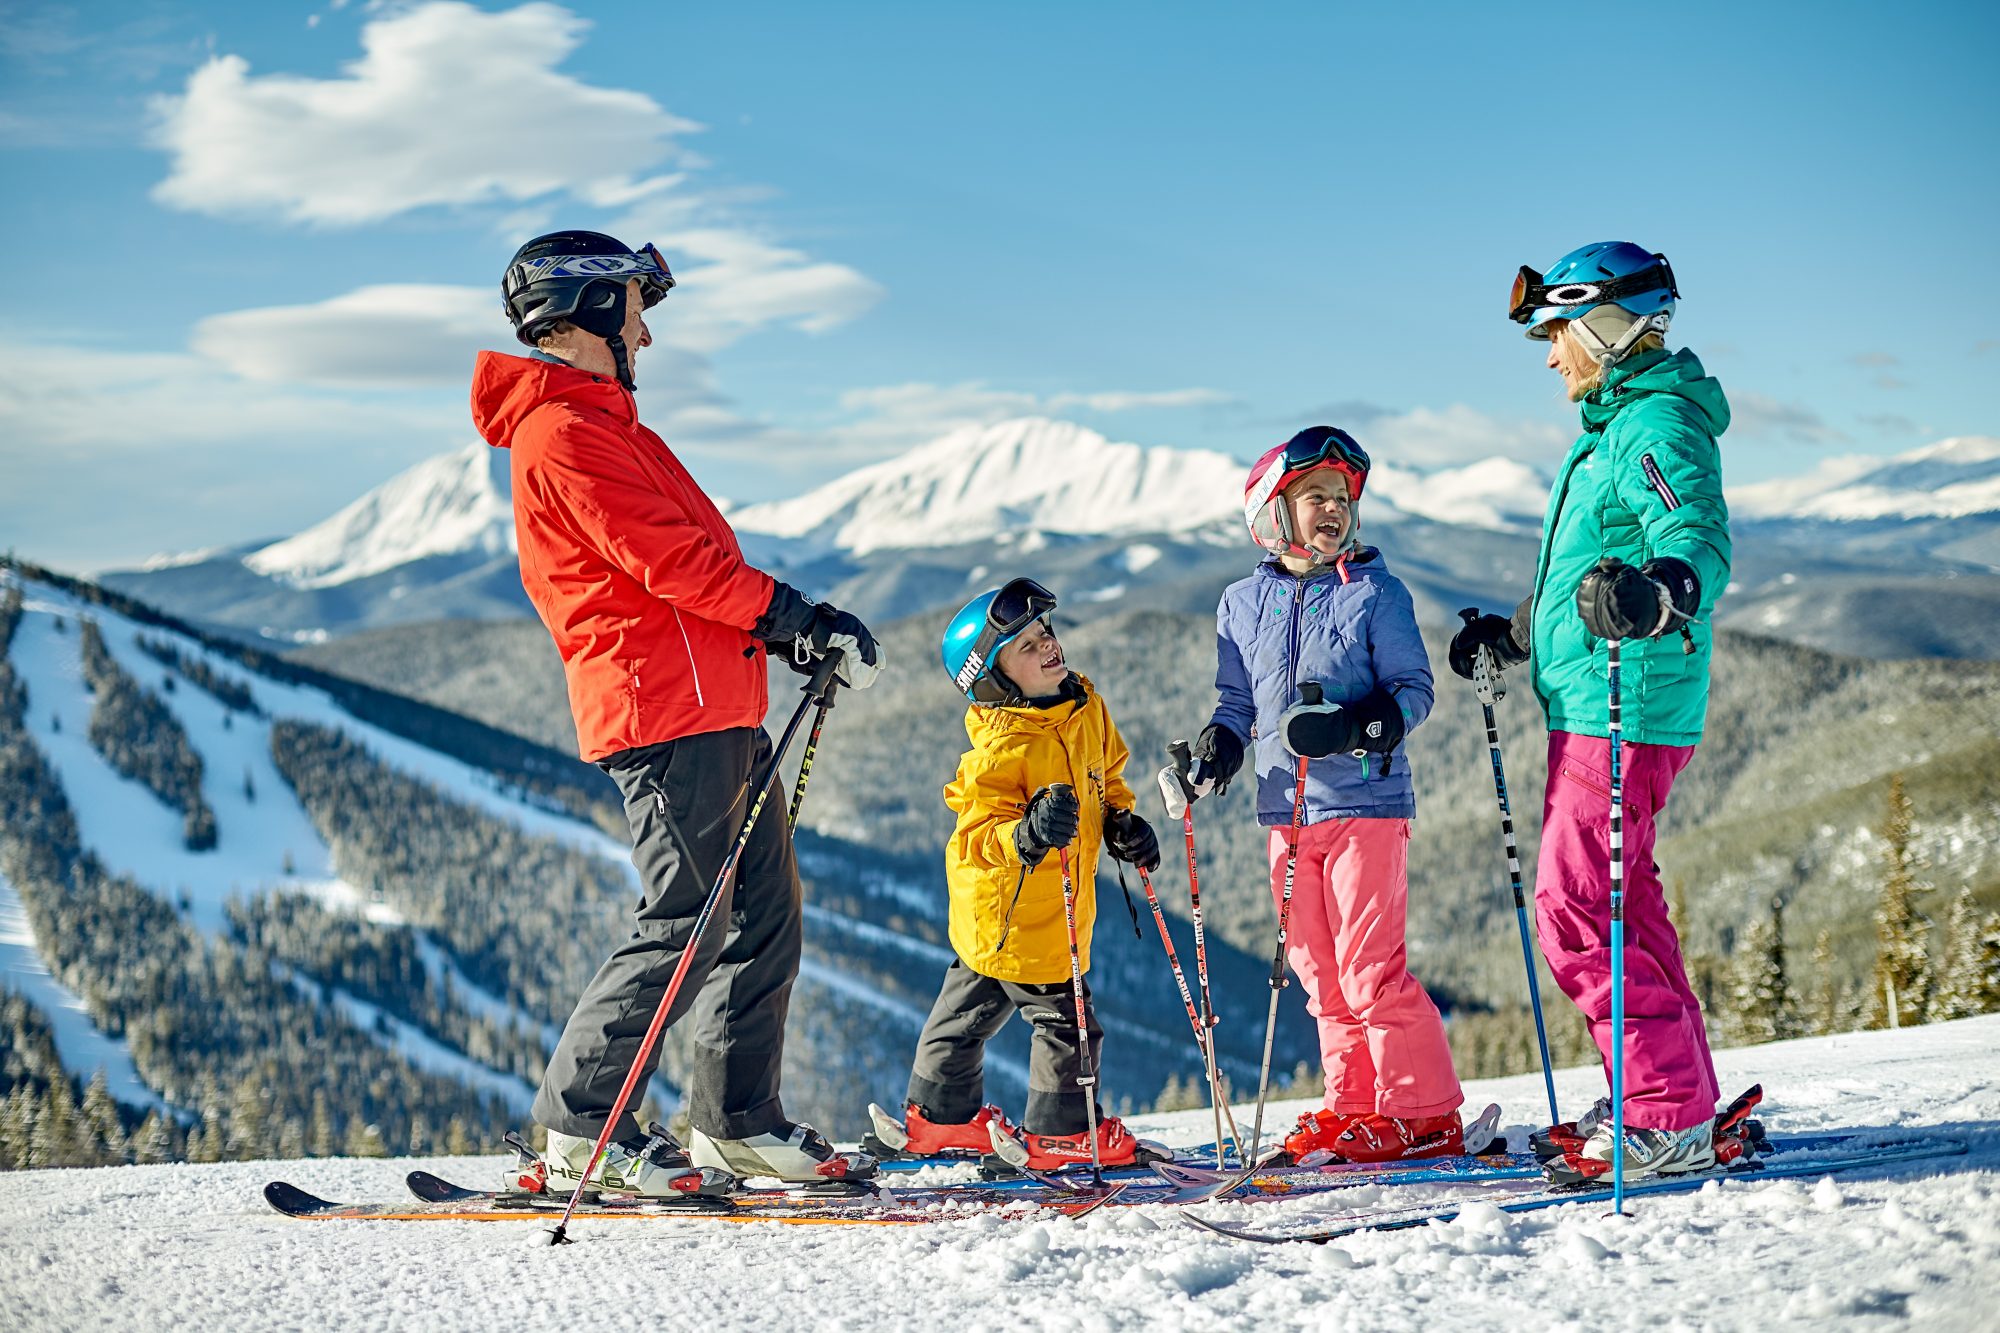 A family takes in the scenery and enjoys a day of skiing in Keystone, CO. Vail Resorts Reports Certain Ski Season Metrics for the Season-to-Date Period Ended April 21, 2019.